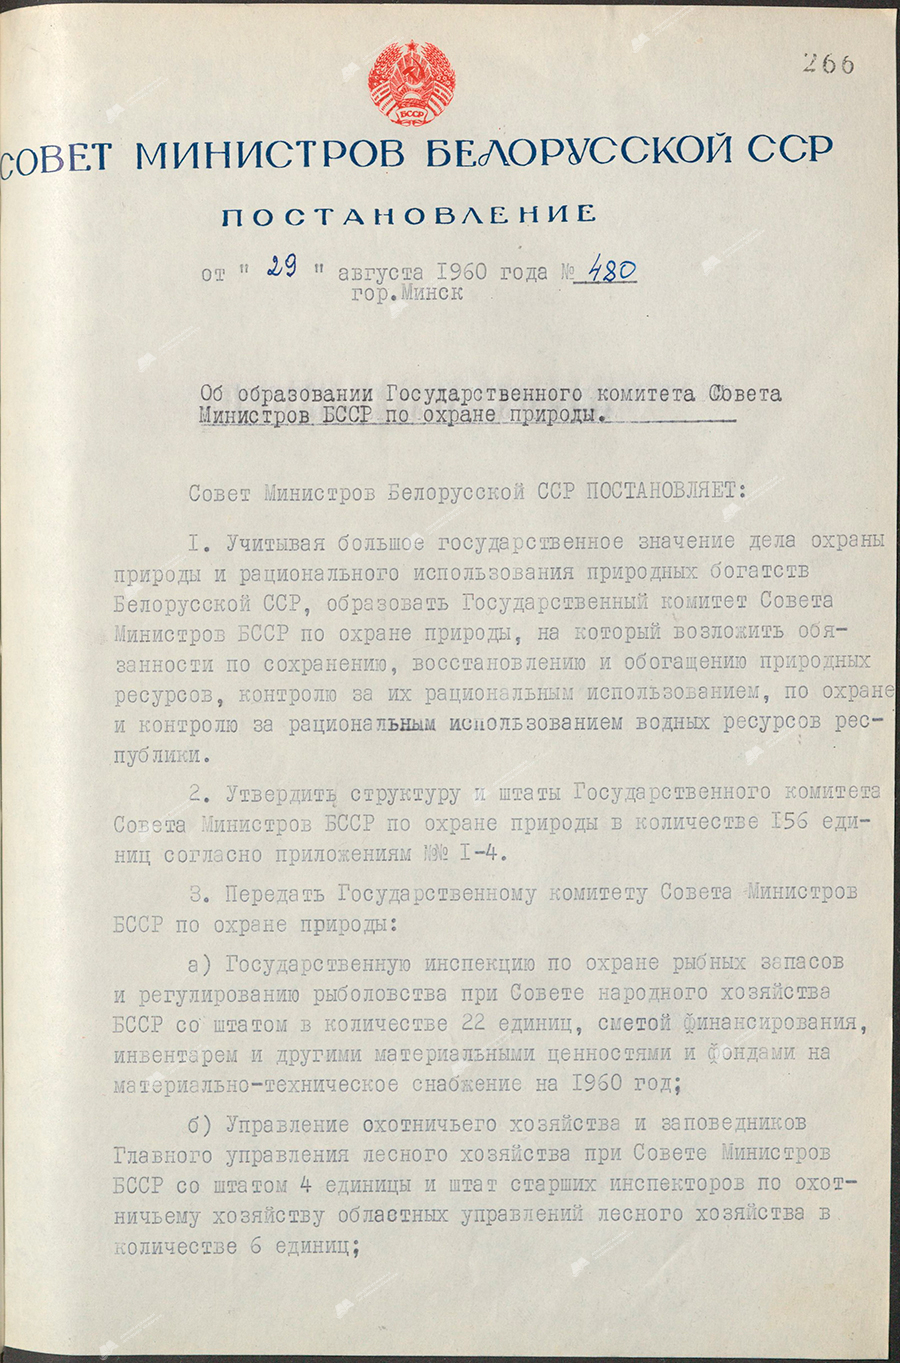 Resolution No. 480 of the Council of Ministers of the BSSR «On the formation of the State Committee of the Council of Ministers of the BSSR for nature protection»-с. 0